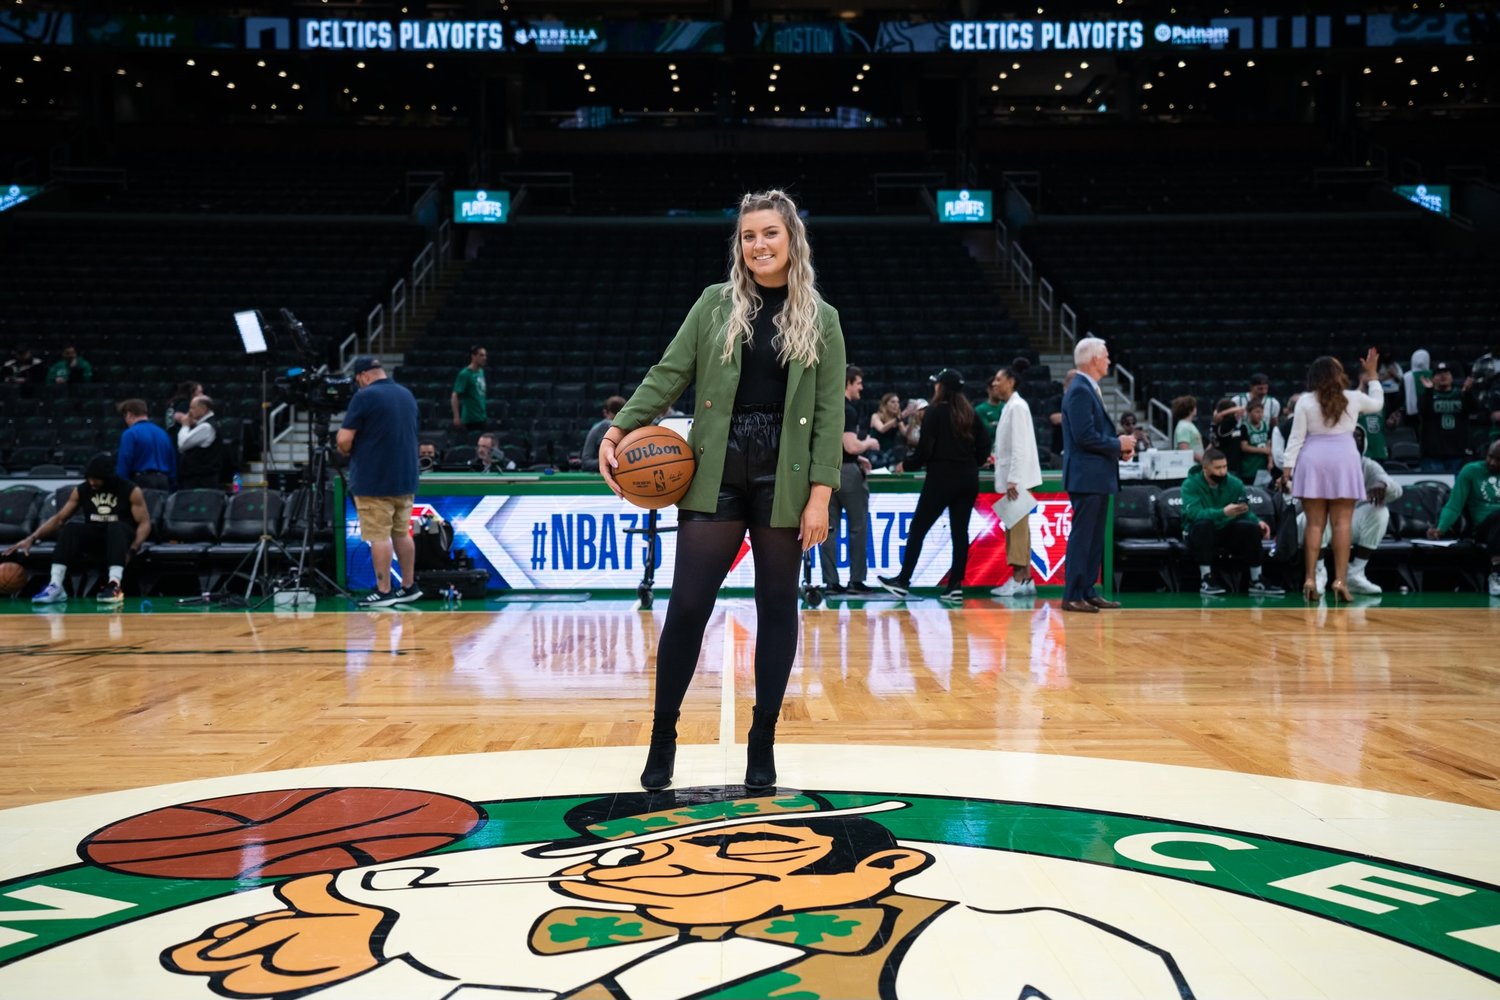 Crawfordsville’s own Clancy Wolf stands at center court at TD Garden, the home of the Boston Celtics where she is the Manager of Operations for the team amongst a variety of other duties.